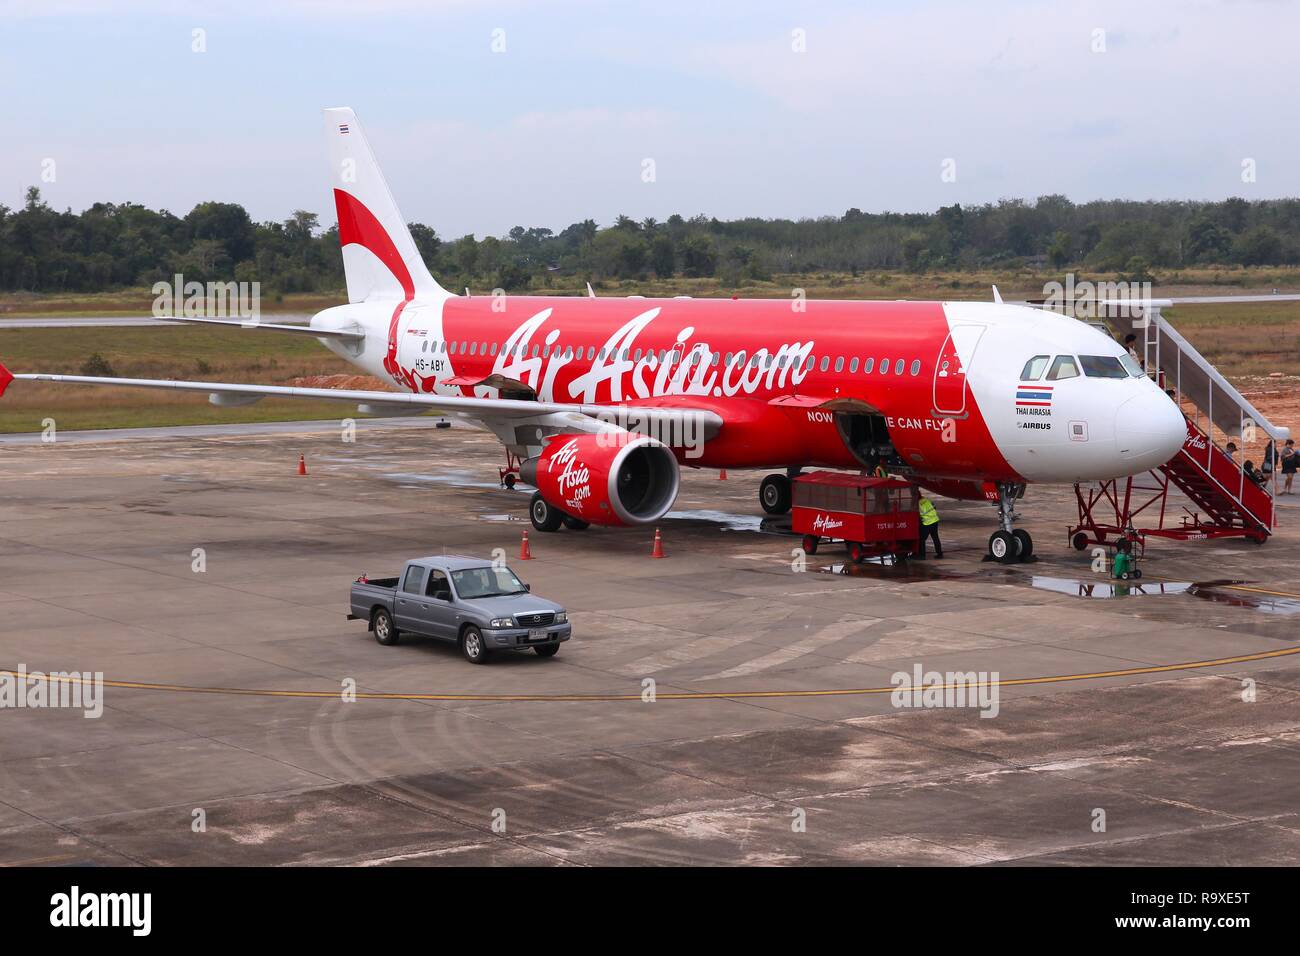 TRANG, THAILAND - DECEMBER 21, 2013: Workers handle Air Asia Airbus A320 at Trang Airport in Thailand. Air Asia group flies 169 aircraft to 121 destin Stock Photo